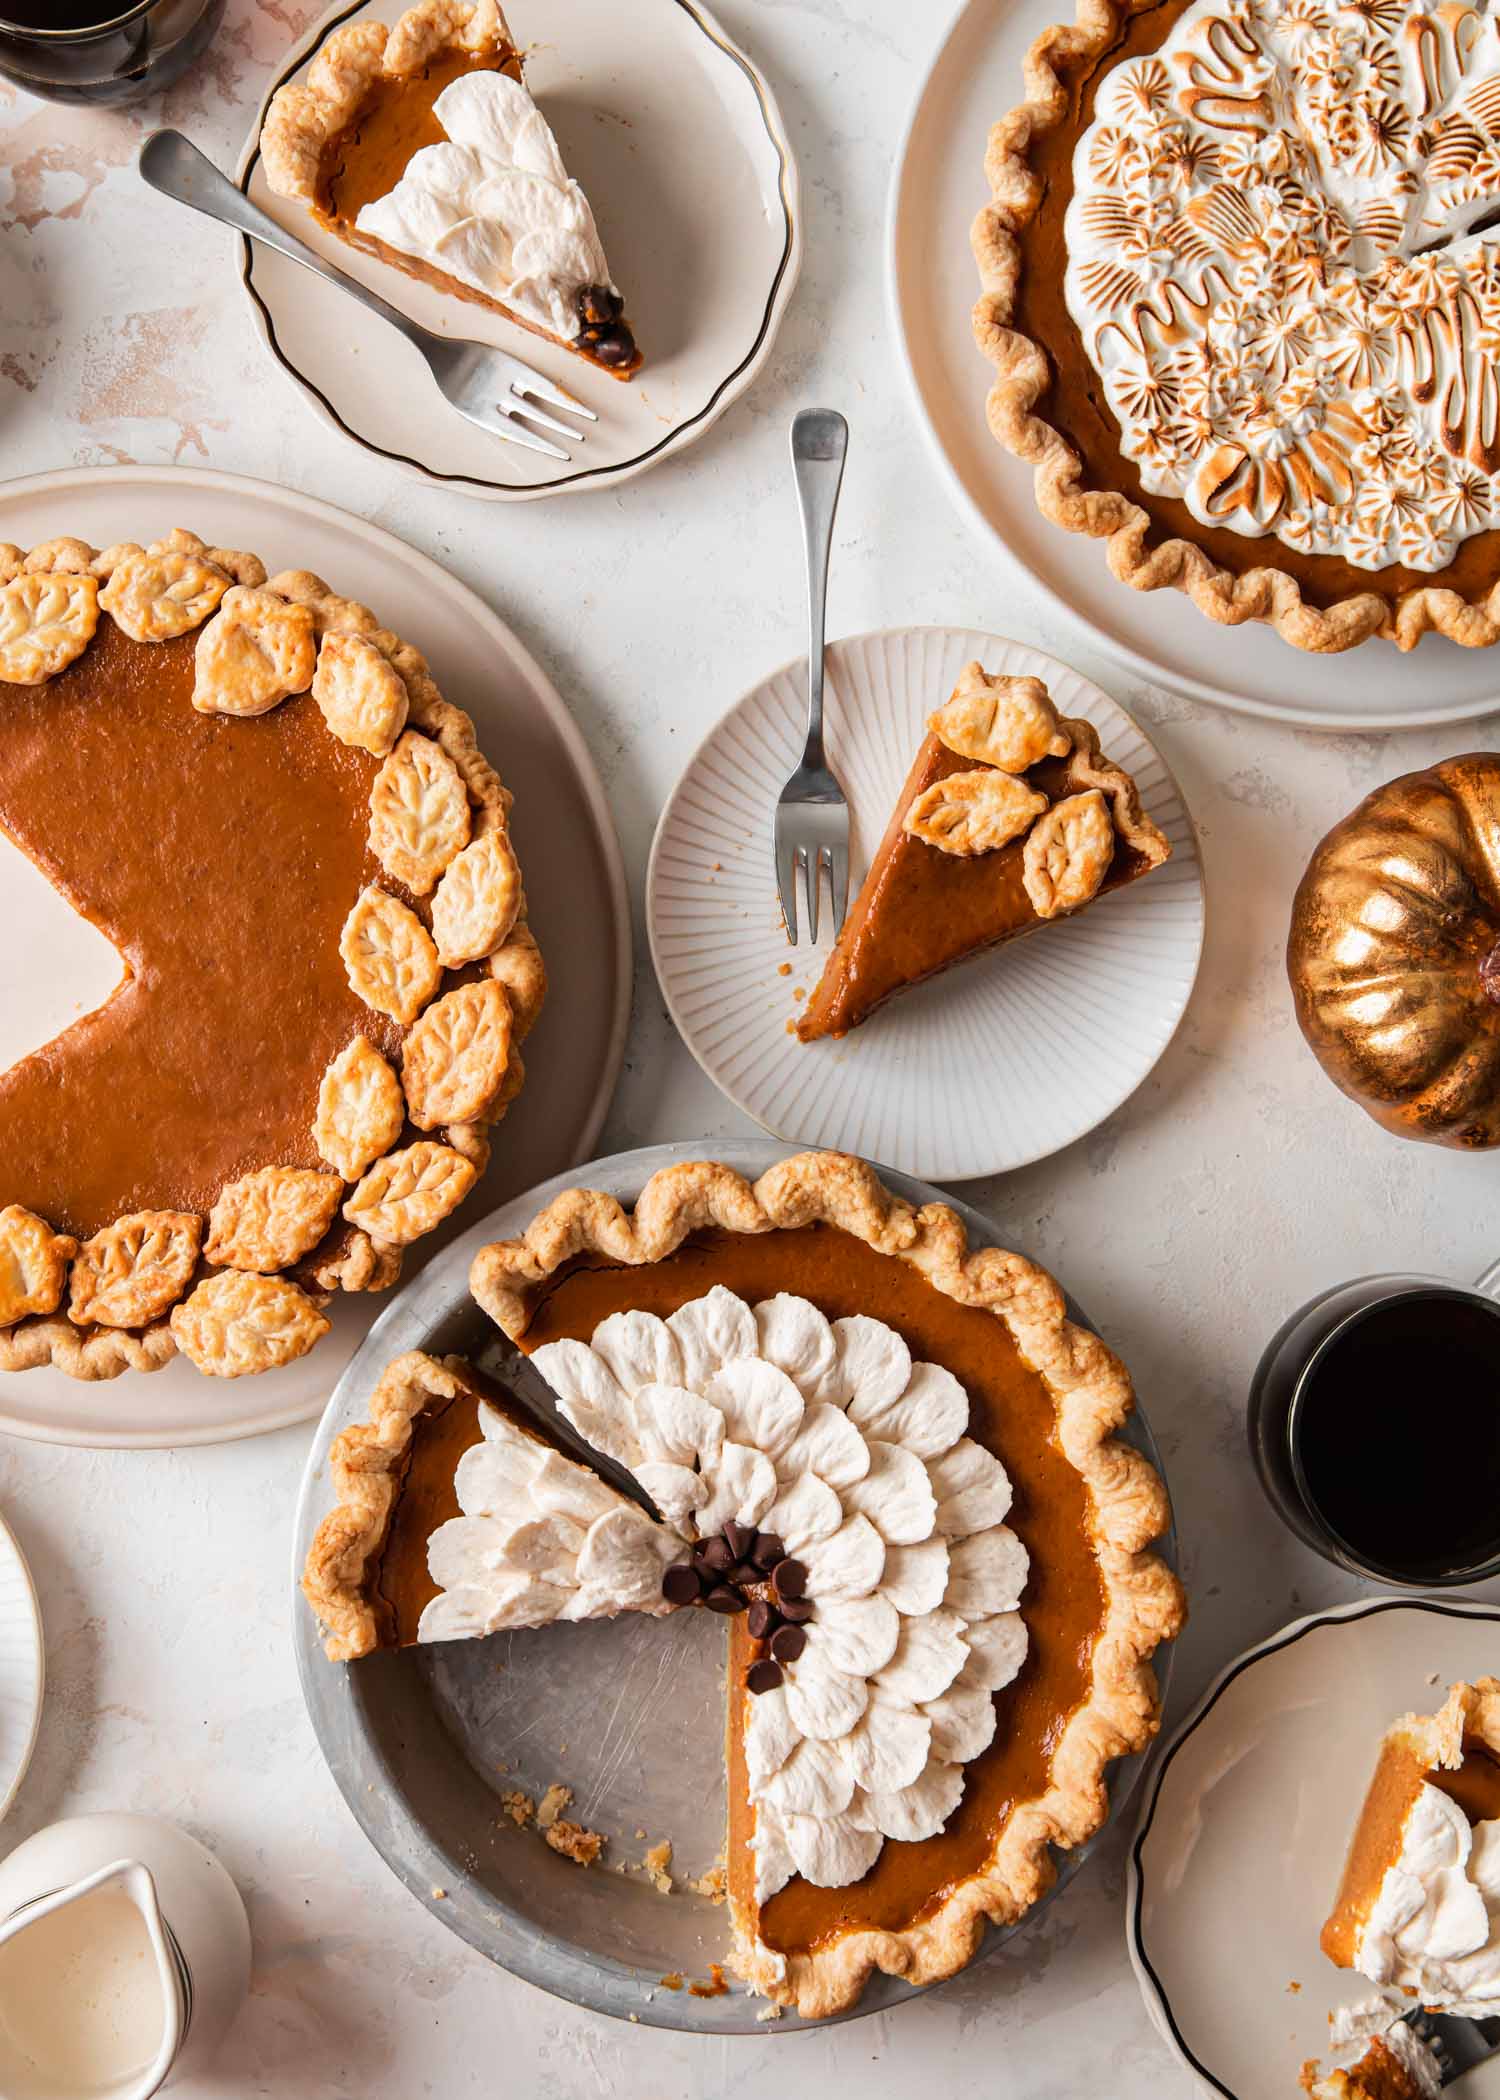 A table full of pumpkin pies and slices of pie that have been decorated three different ways